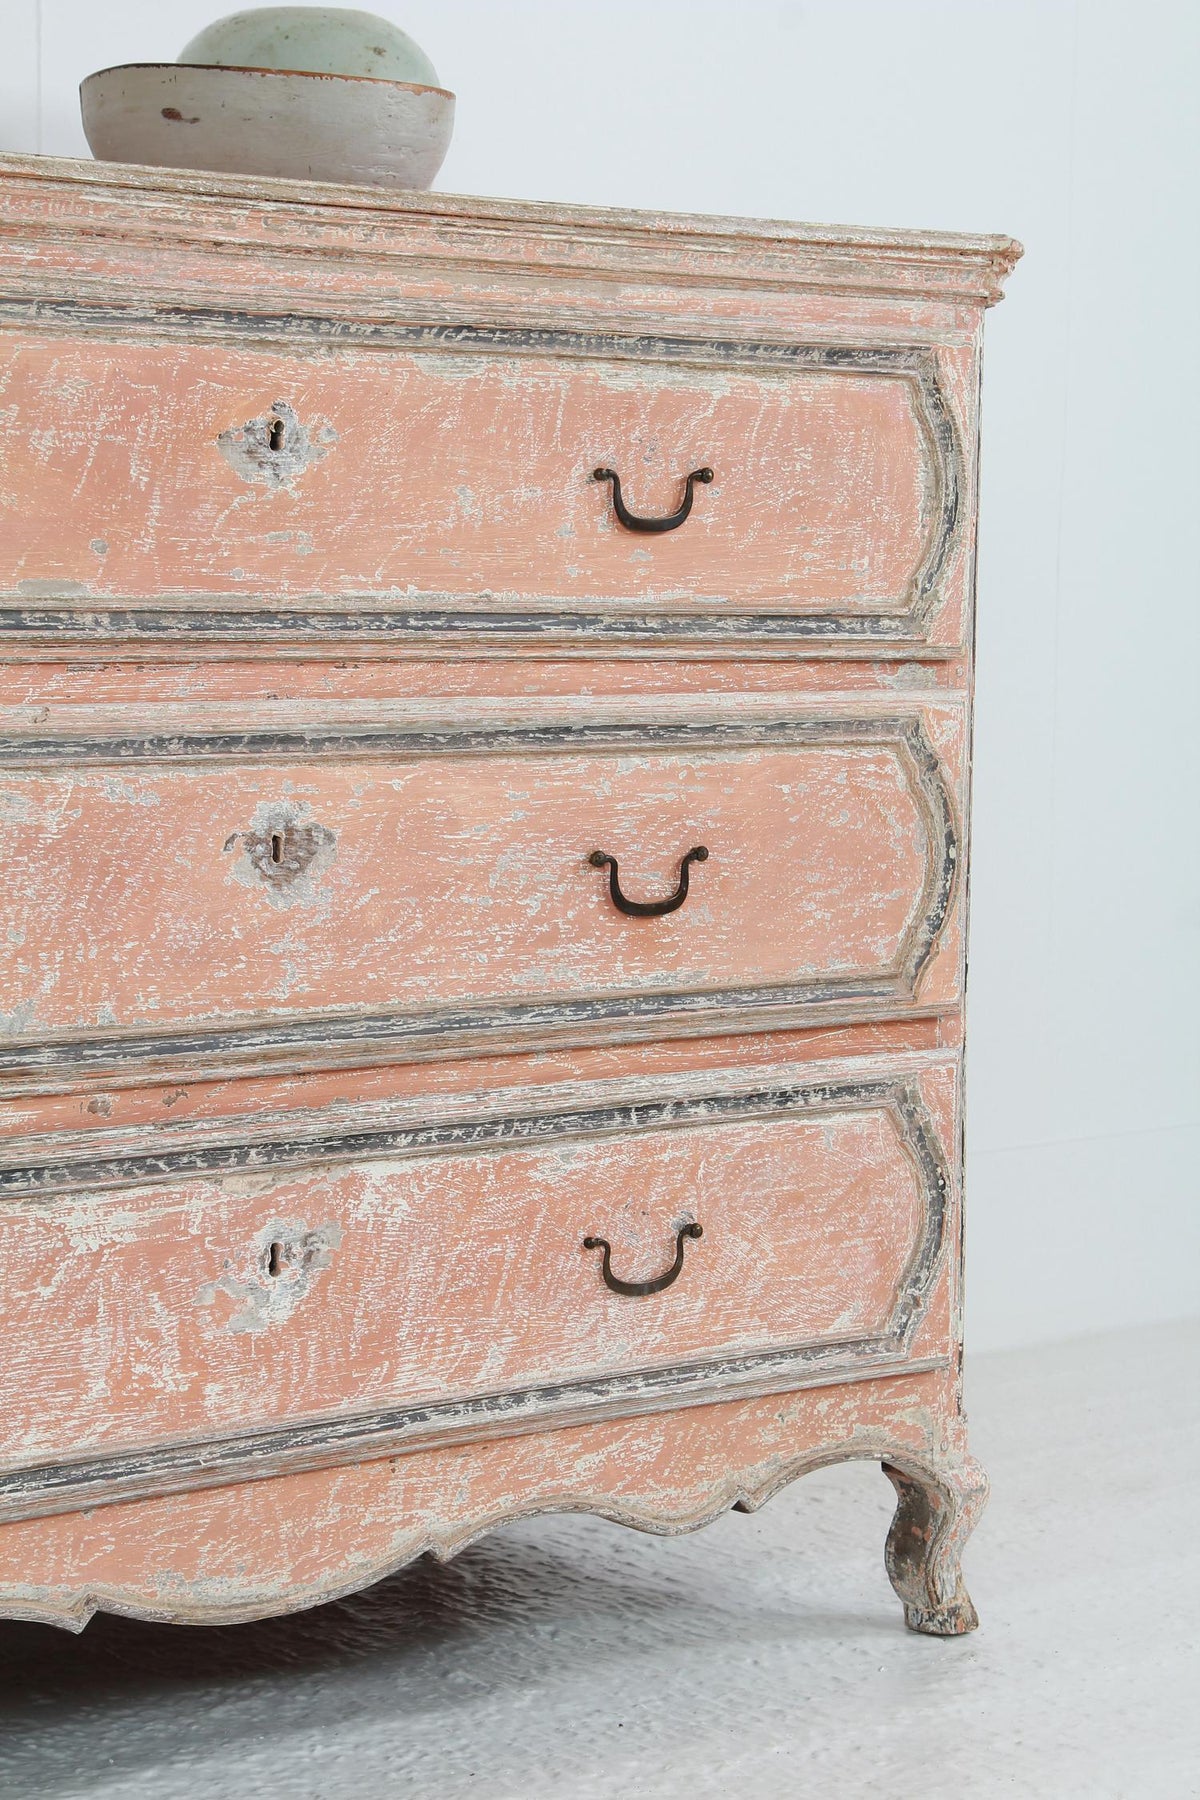 French 19th Century Louis XV Chest of Drawers in Blush Pink Patina